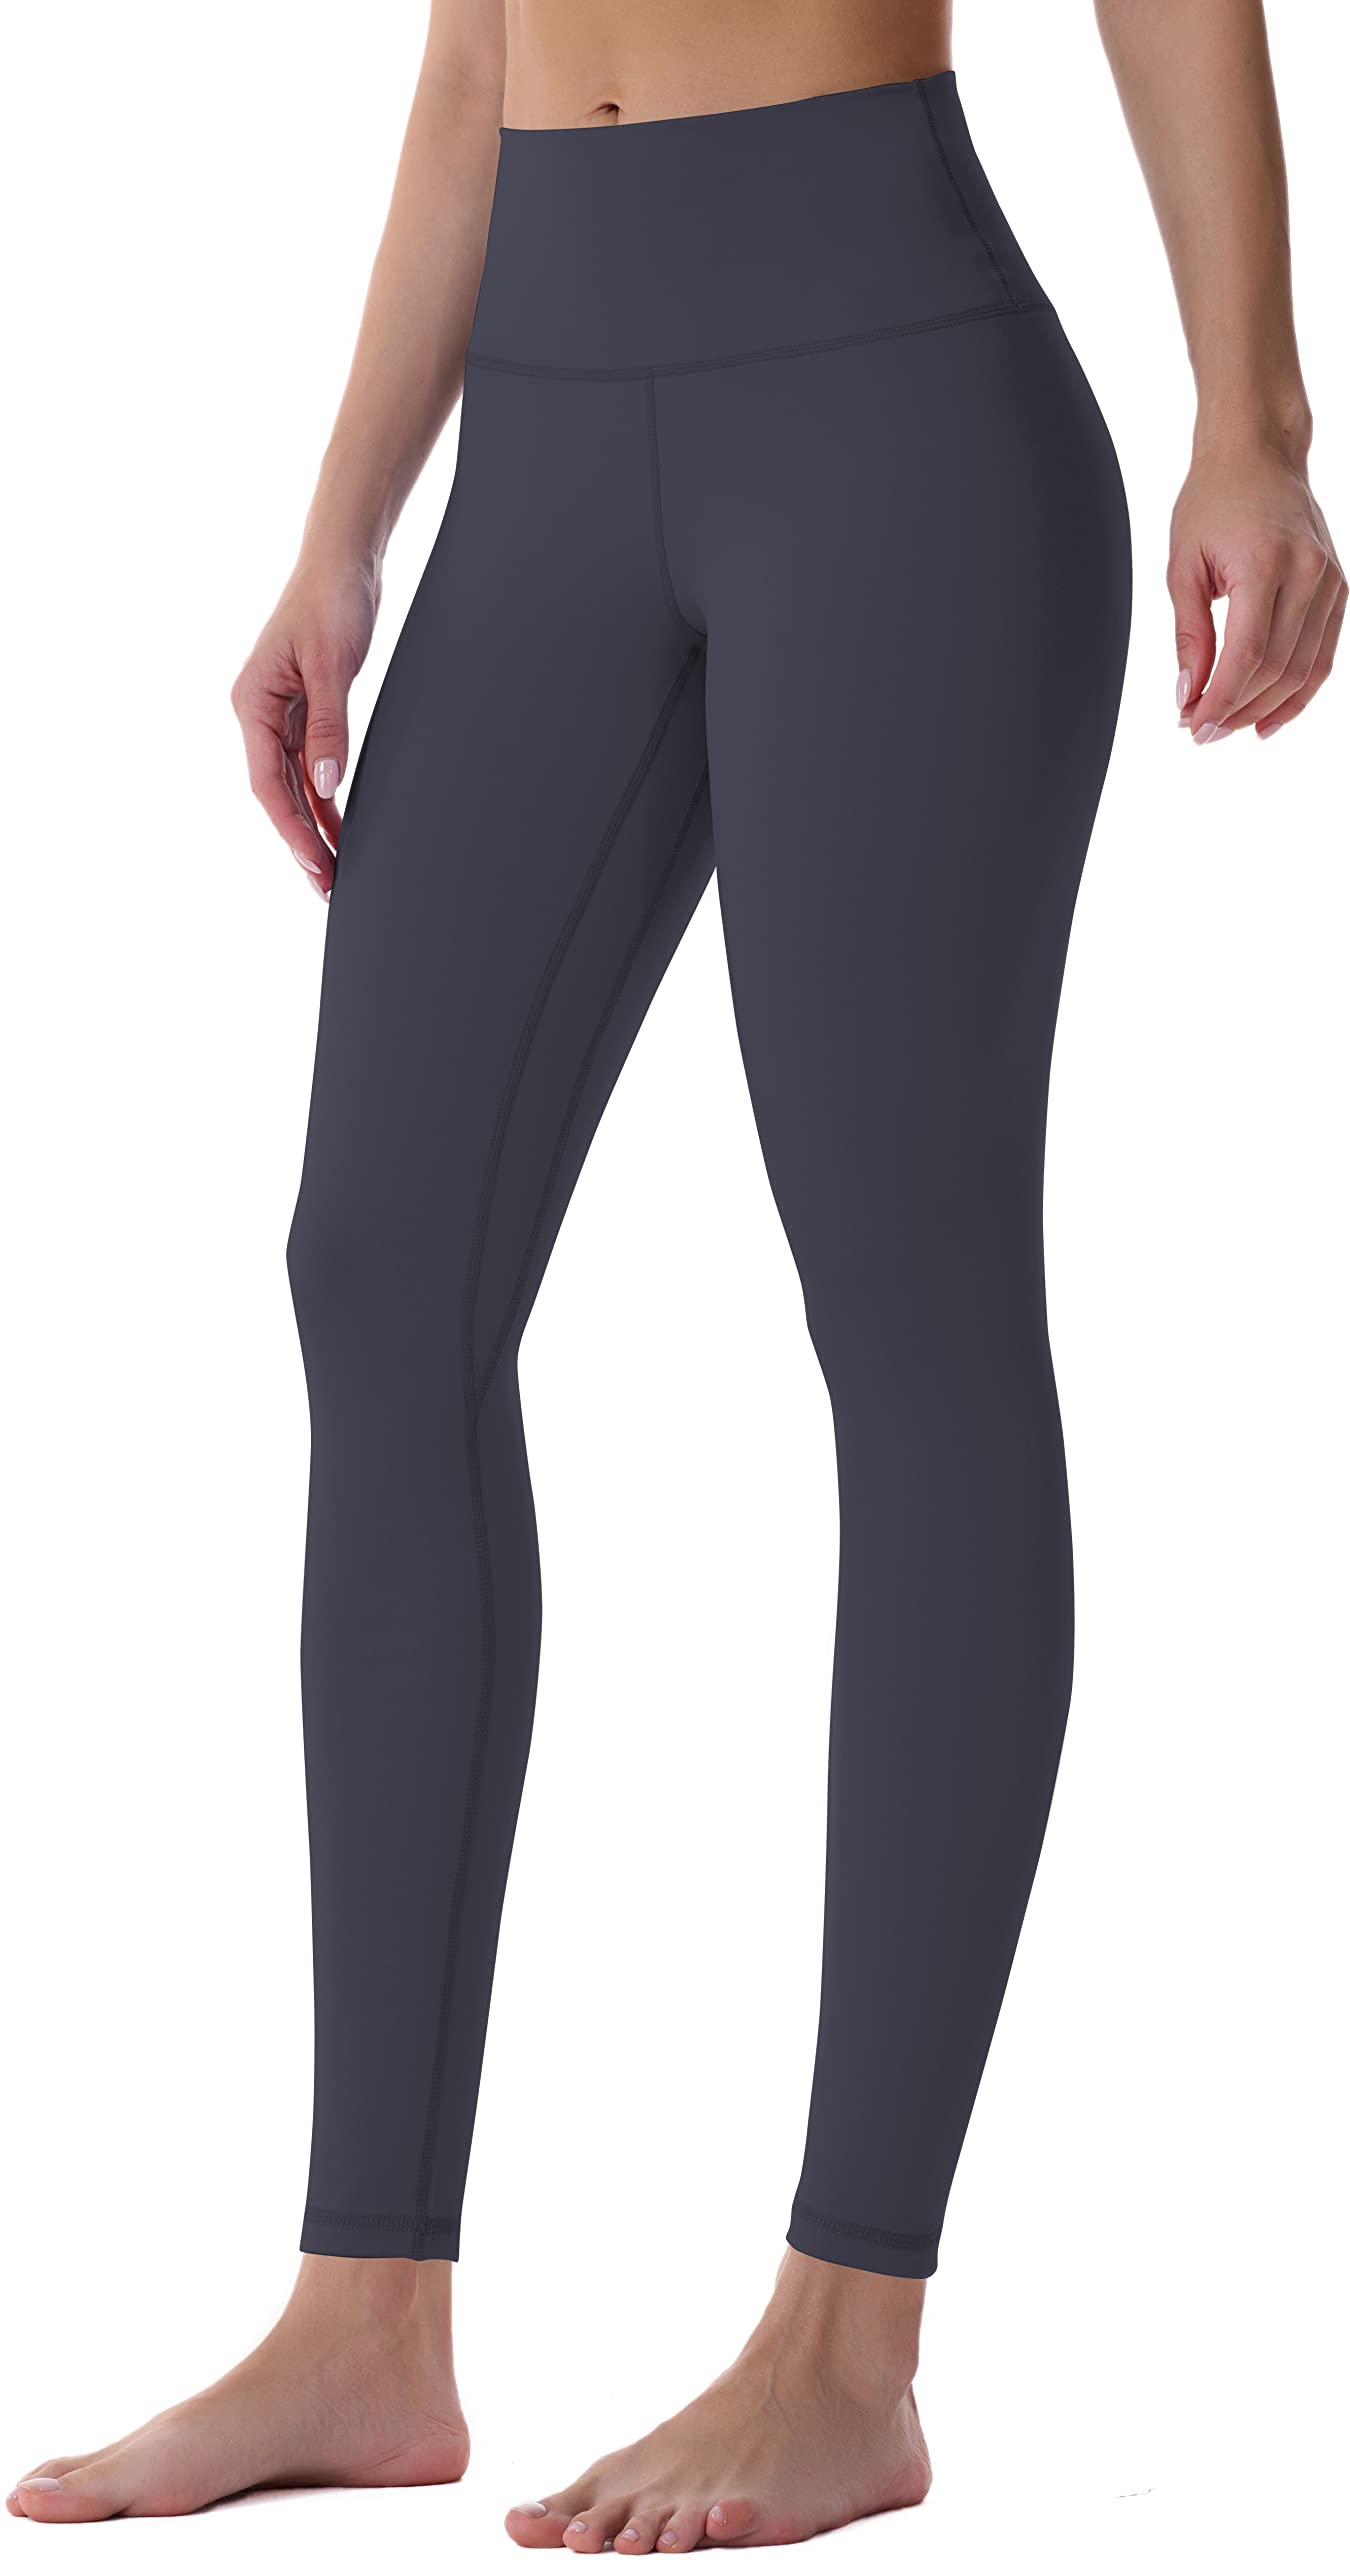 Sunzel Workout Leggings Are Cheap and Virtually Sweatproof